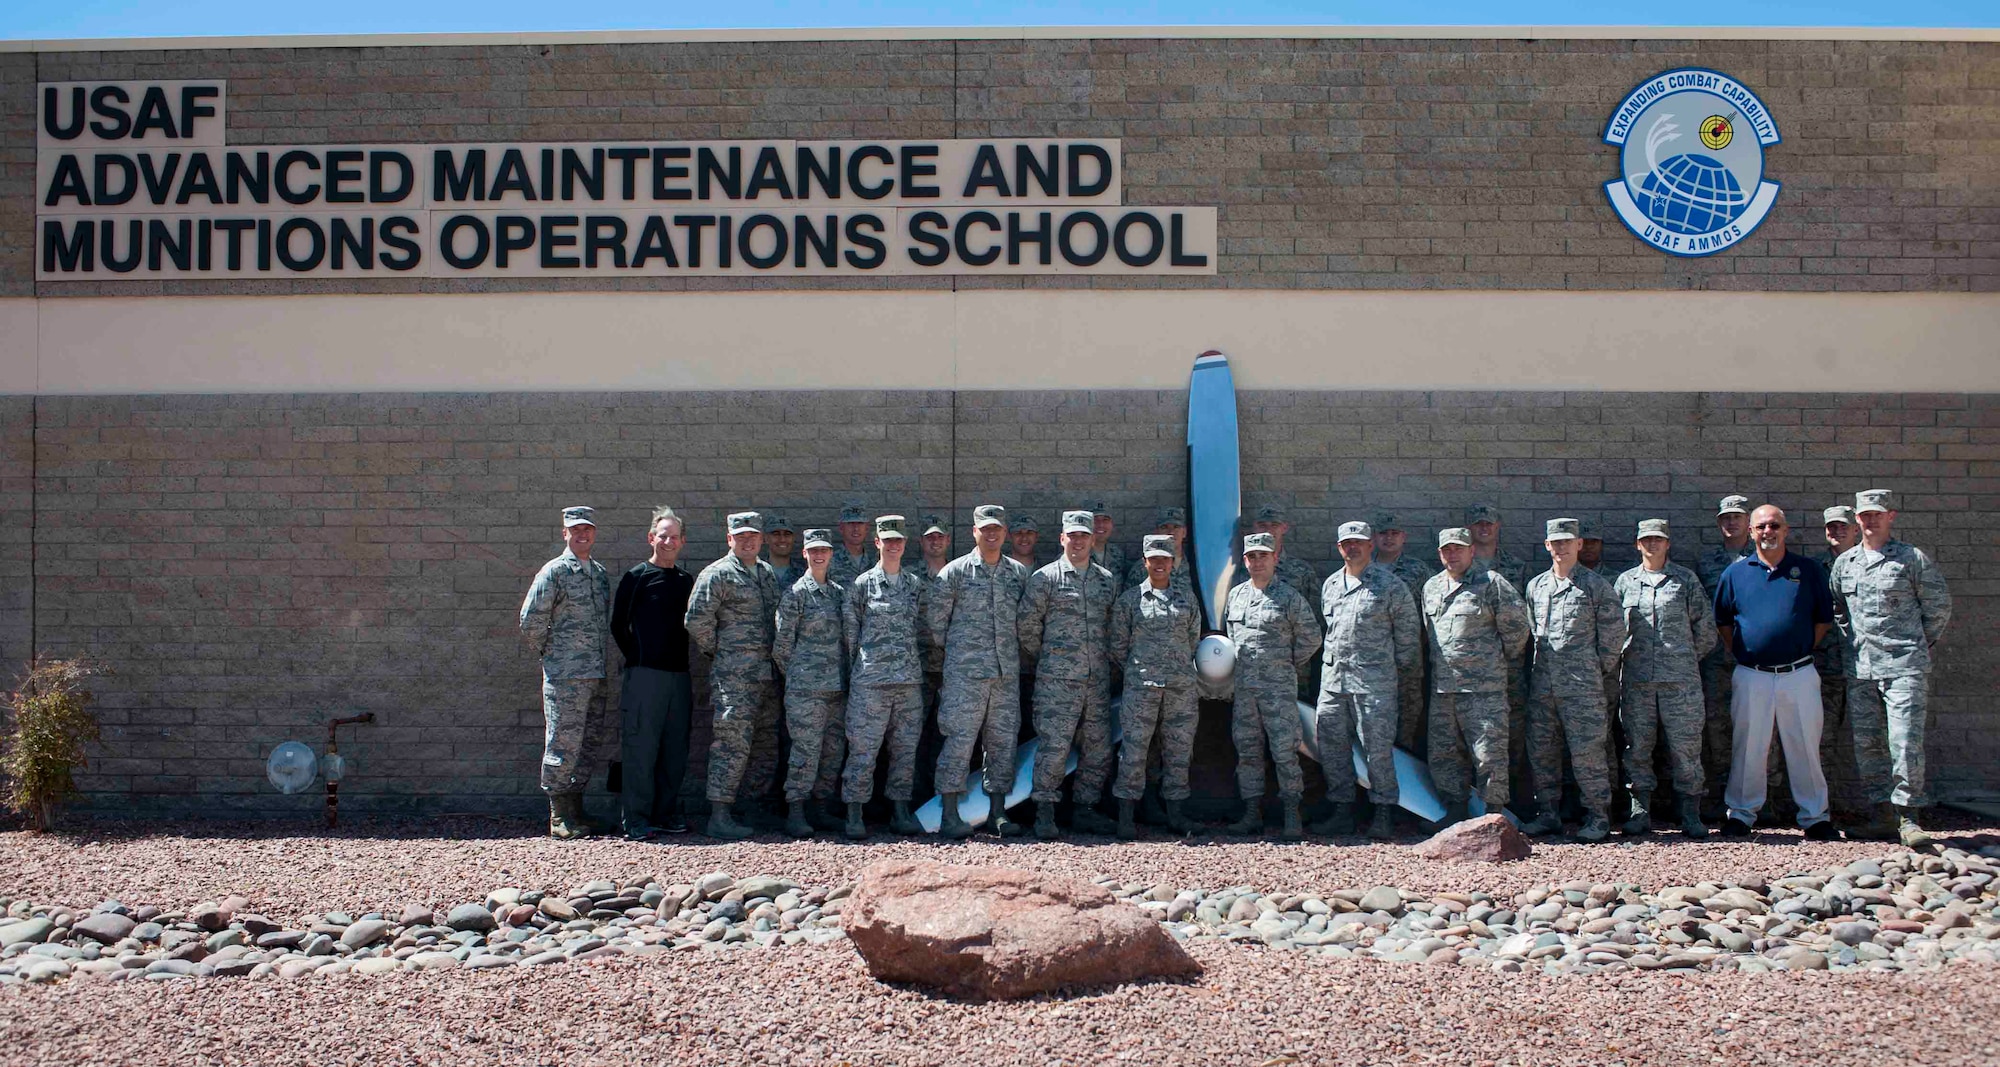 Students and cadre of the Advanced Sortie Production Course at the U.S. Air Force Advanced Maintenance and Munitions Operations School on Nellis Air Force Base, Nev., pose for a group photo Sept. 13, 2016. Throughout the inaugural 12 week course, the ASPC will provide graduate level instruction to develop highly skilled officers in the art of sortie production processes at the tactical level. (U.S. Air Force photo by Senior Airman Jake Carter)